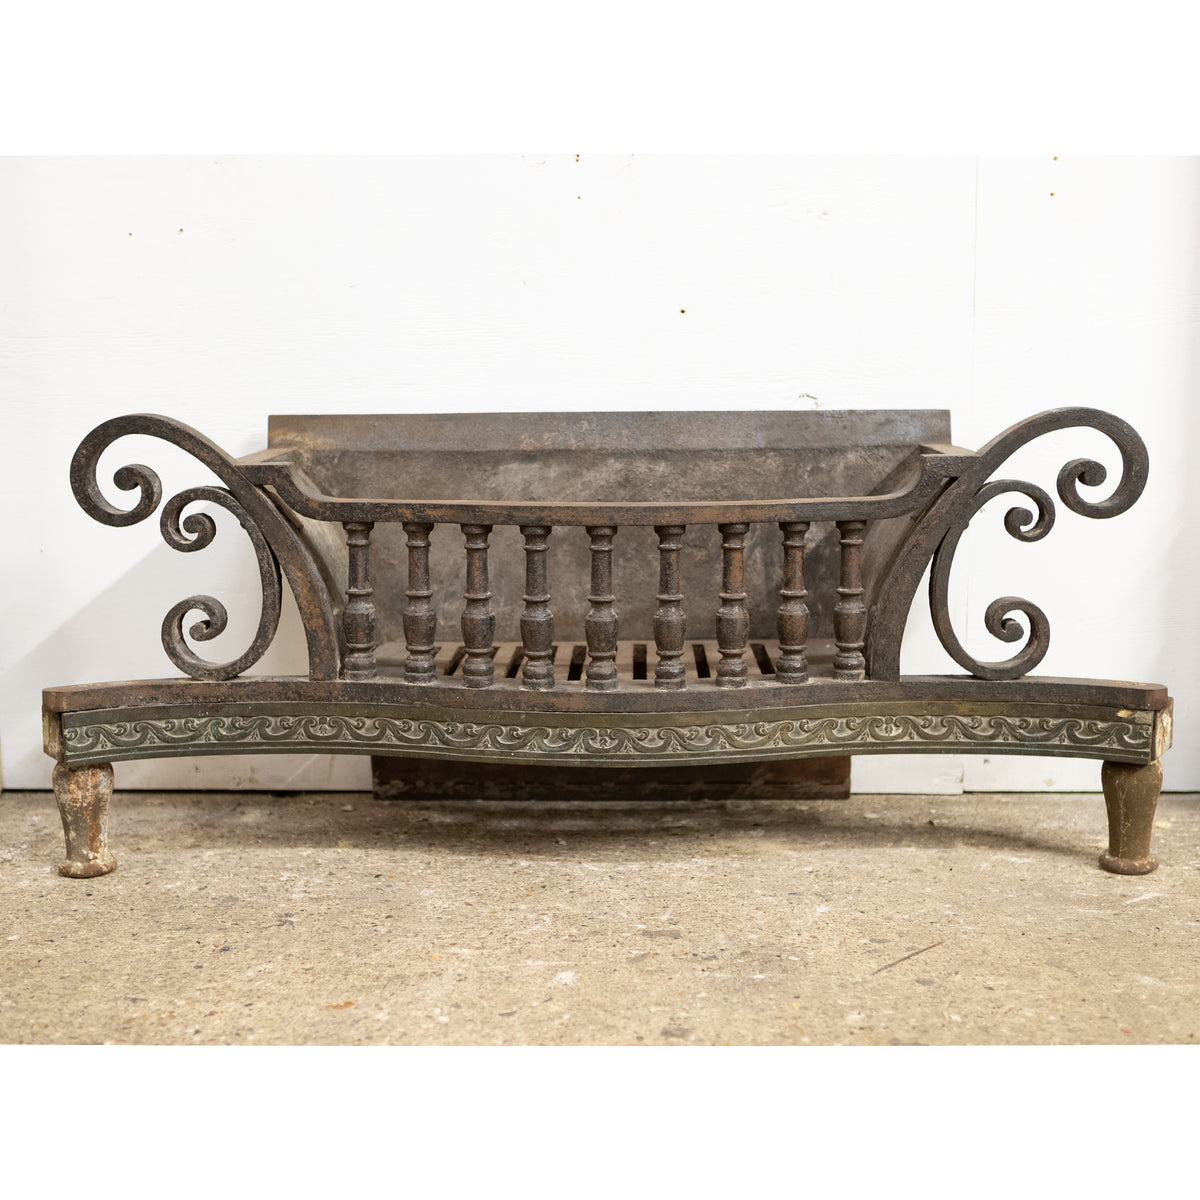 Antique Early 19th Century Wrought Iron Basket | The Architectural Forum